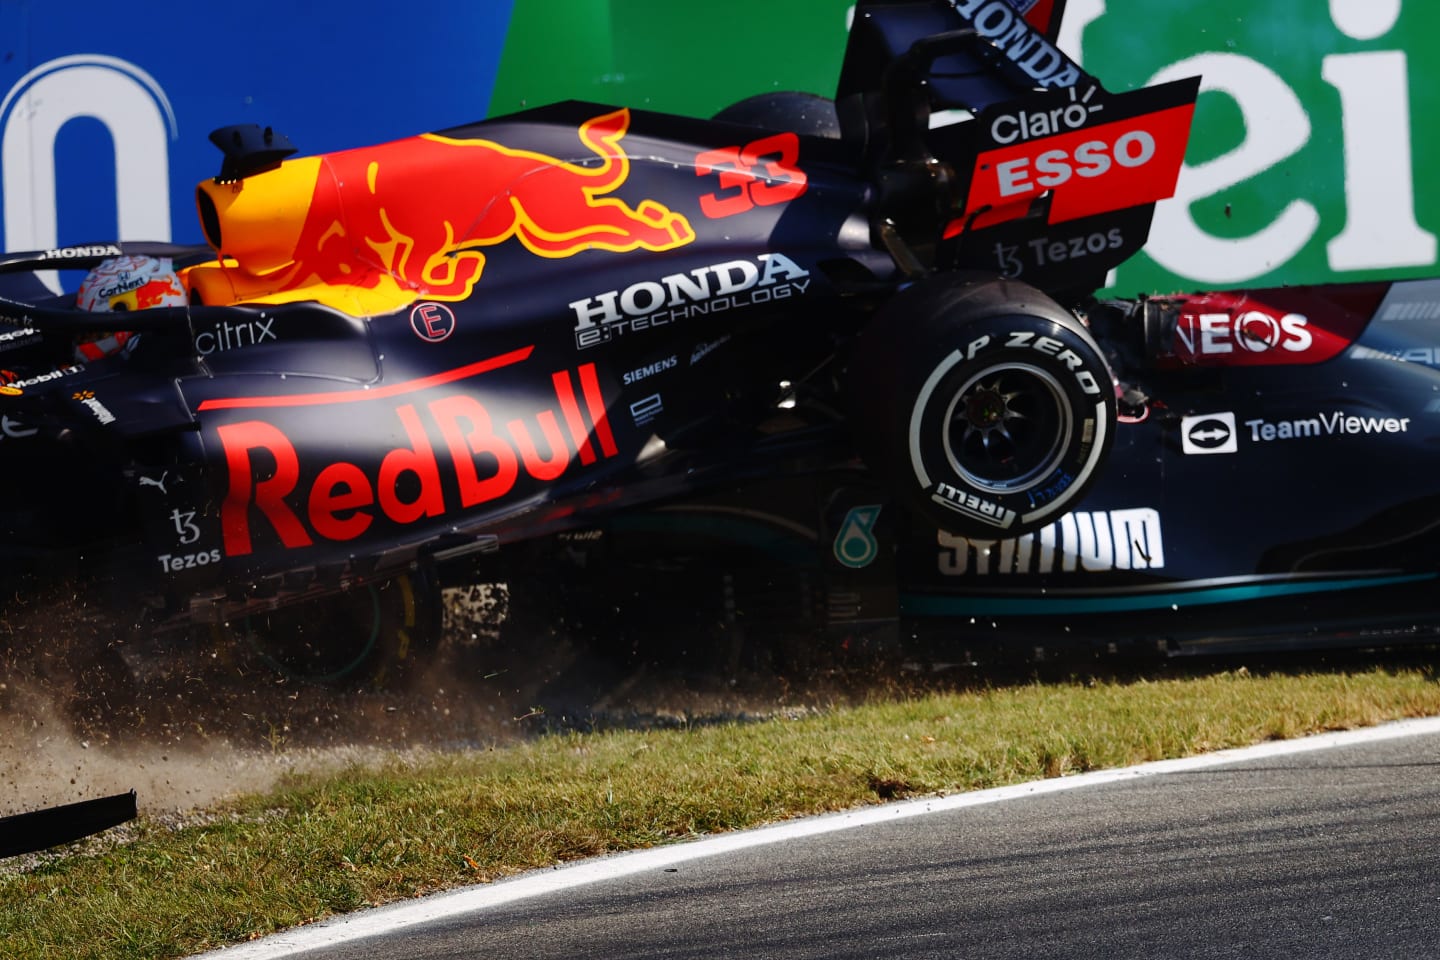 MONZA, ITALY - SEPTEMBER 12: Max Verstappen of the Netherlands driving the (33) Red Bull Racing RB16B Honda and Lewis Hamilton of Great Britain driving the (44) Mercedes AMG Petronas F1 Team Mercedes W12 crash during the F1 Grand Prix of Italy at Autodromo di Monza on September 12, 2021 in Monza, Italy. (Photo by Dan Istitene - Formula 1/Formula 1 via Getty Images)